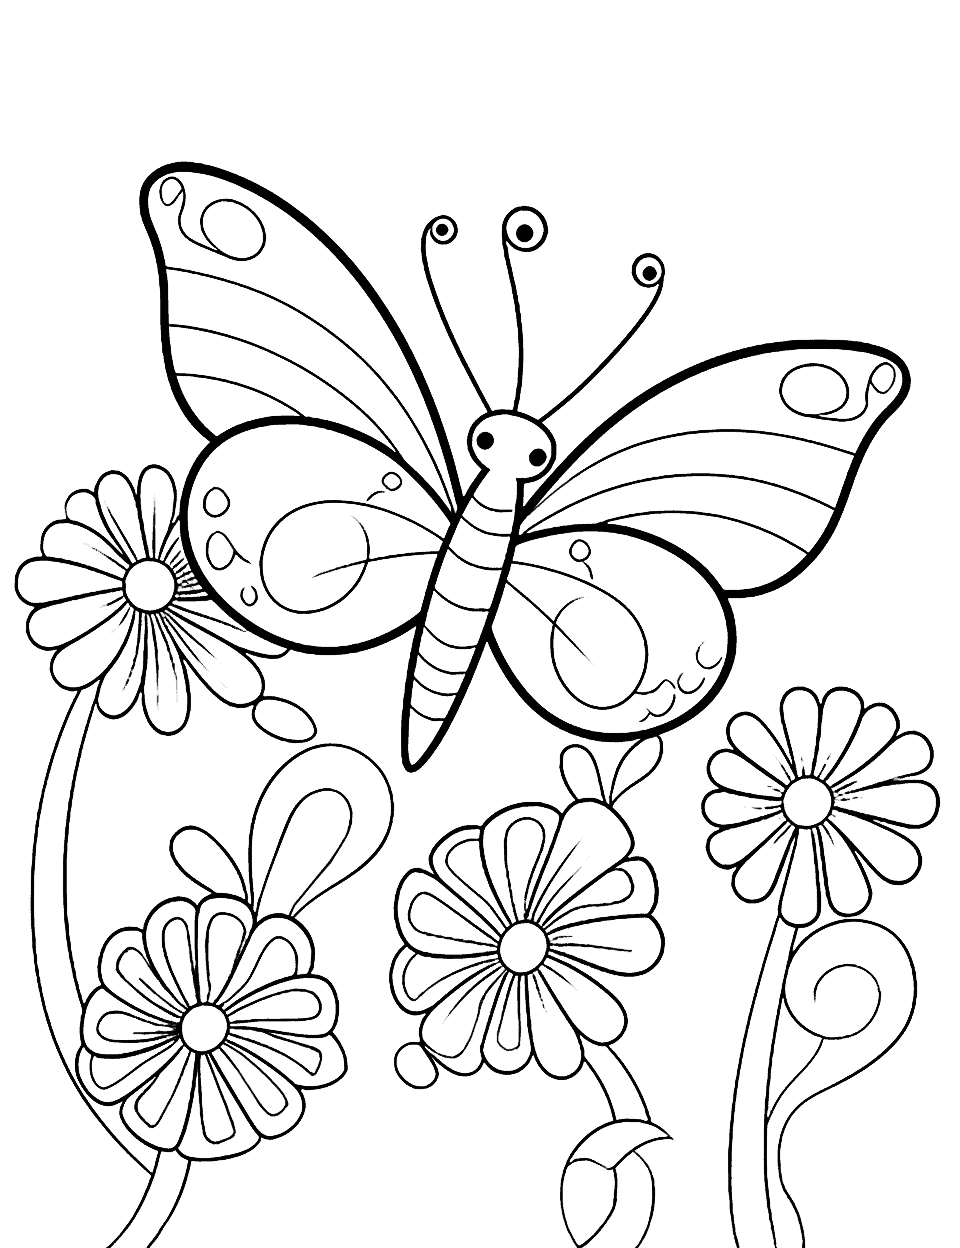 Butterflies and Flowers Animal Coloring Page - Butterflies fluttering around a garden filled with blooming flowers.